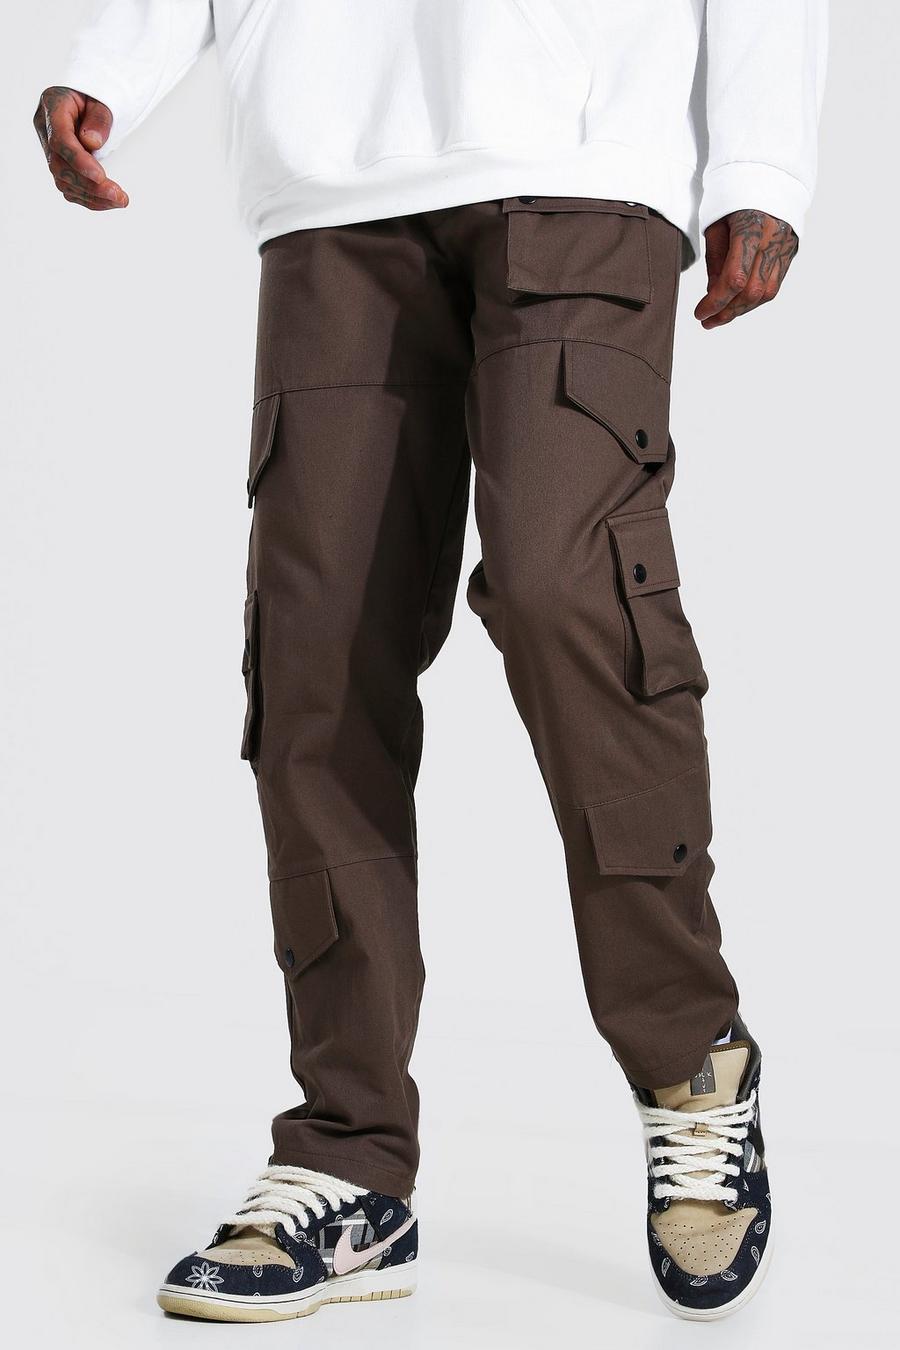 Cargo Pants for Men with Pockets Mens Casual Relaxed Fit Big and Tall Cargo Trousers Pockets Full Pants 